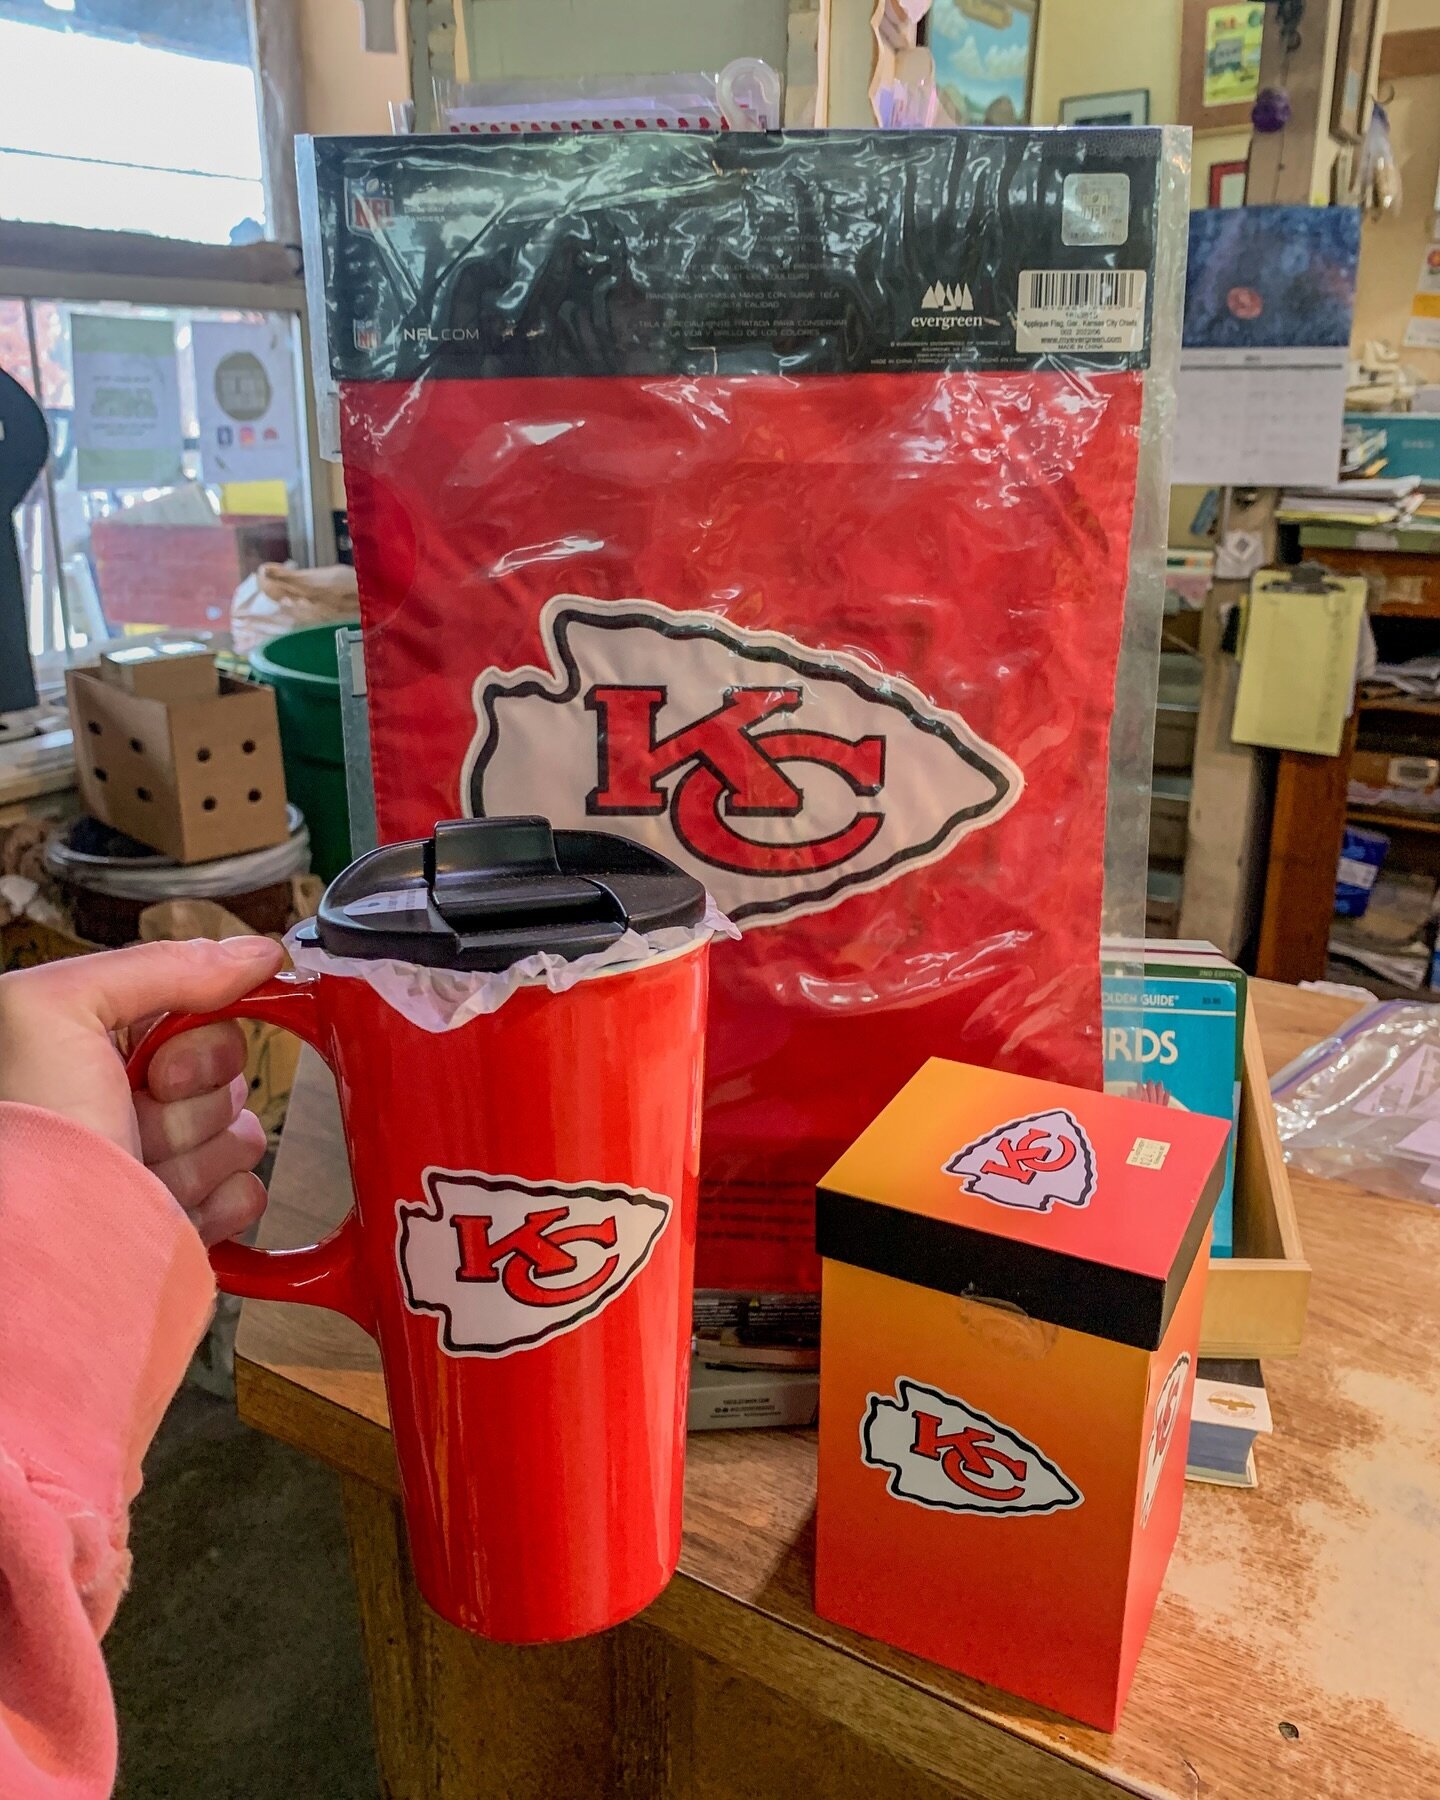 The Chiefs are heading to the Super Bowl🏈! So head on into OK Hatchery to show your support❤️!